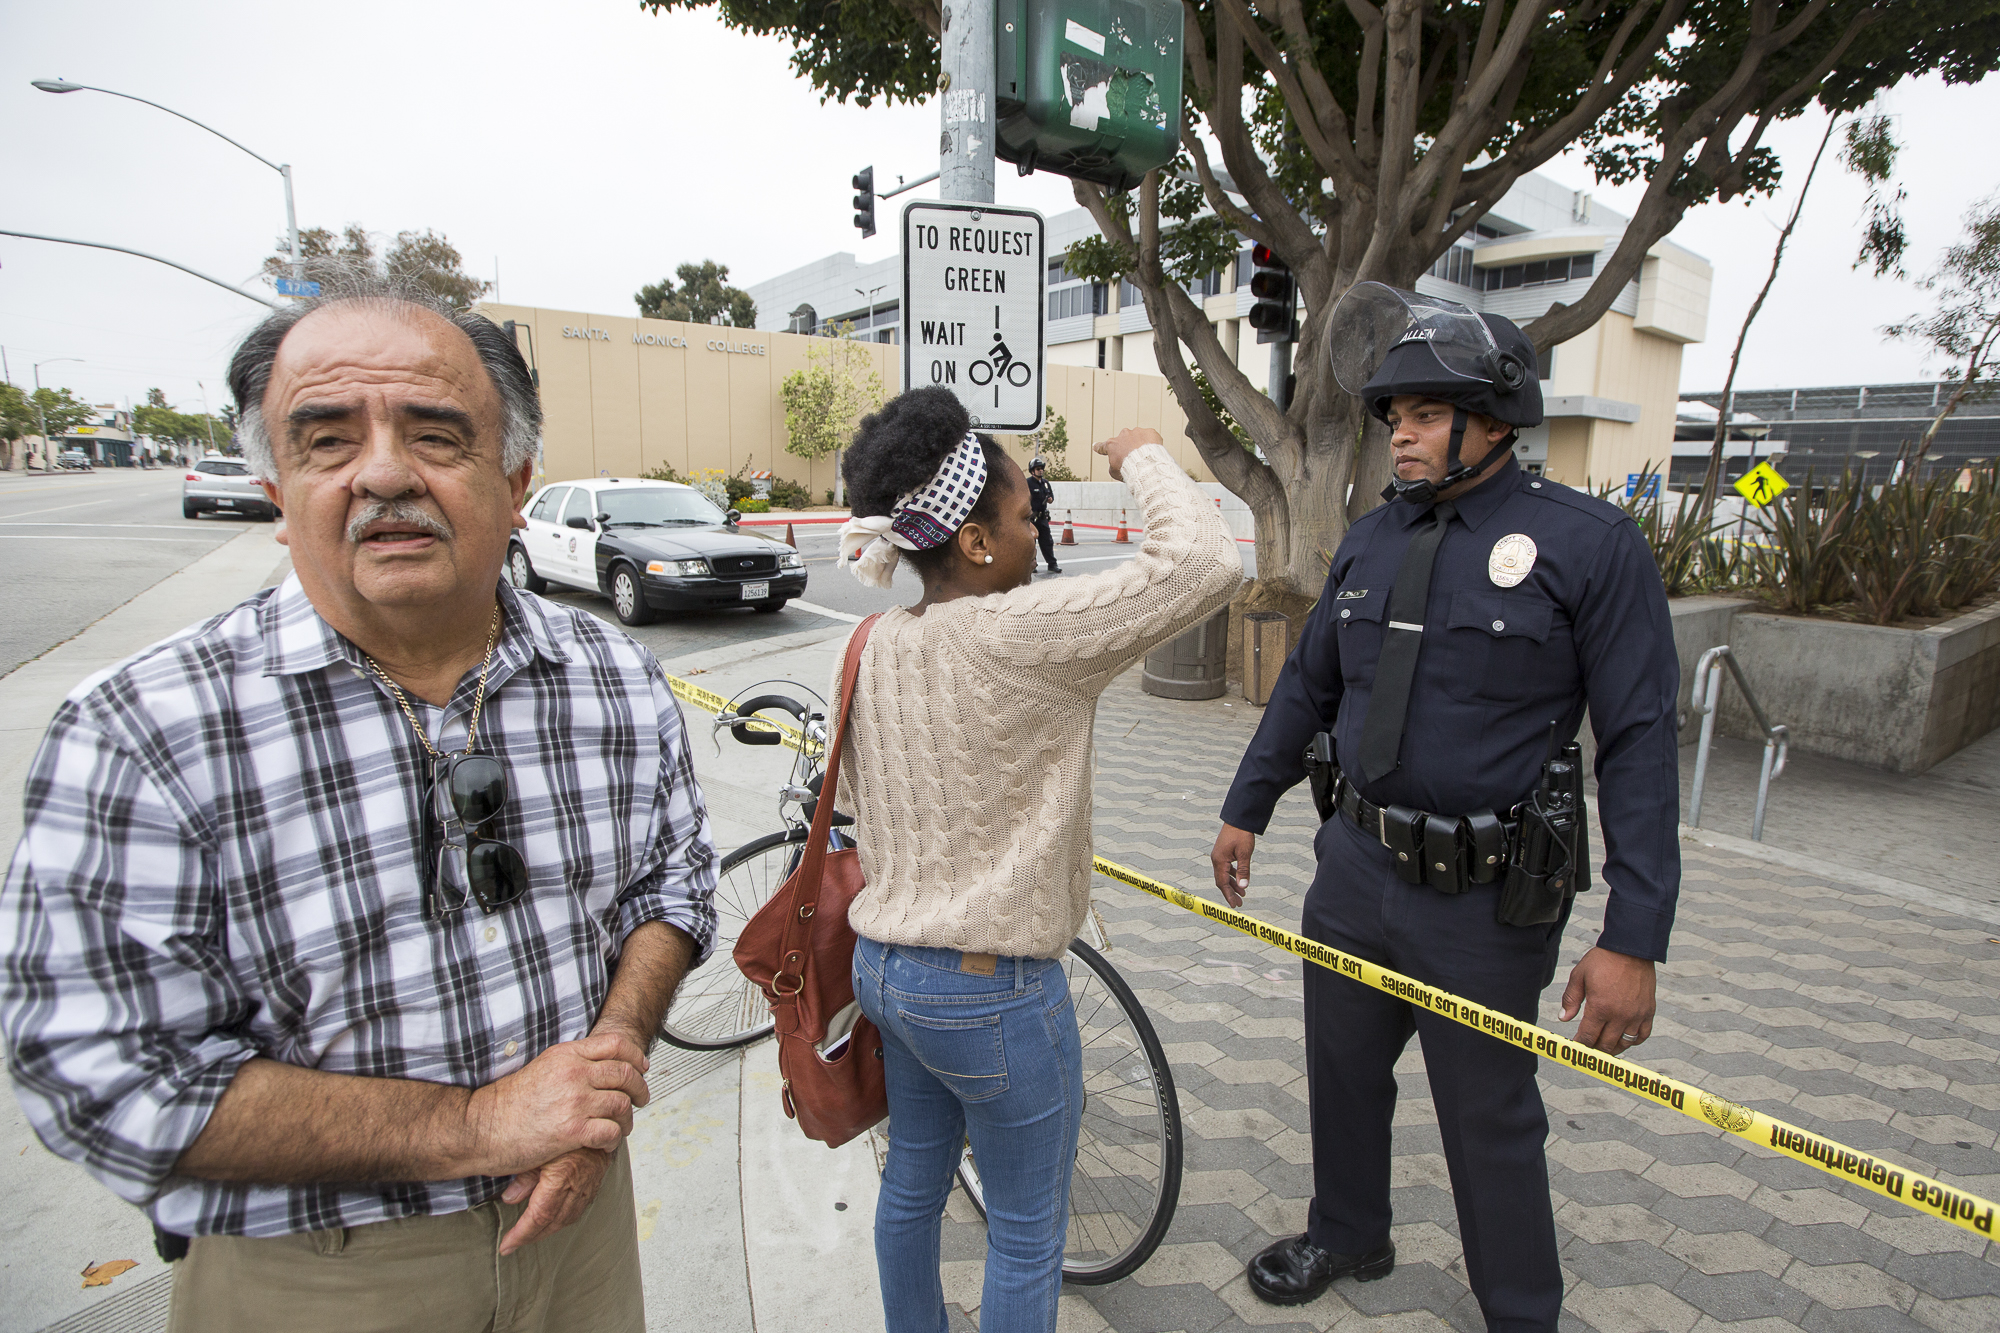  Professor Raul Ruiz waits at the police line after being evacuated in the middle of giving a final exam due to a shooting on the main campus of Santa Monica College on June 7, 2013 in Santa Monica, California. (Jose Lopez/Corsair Contributor) 